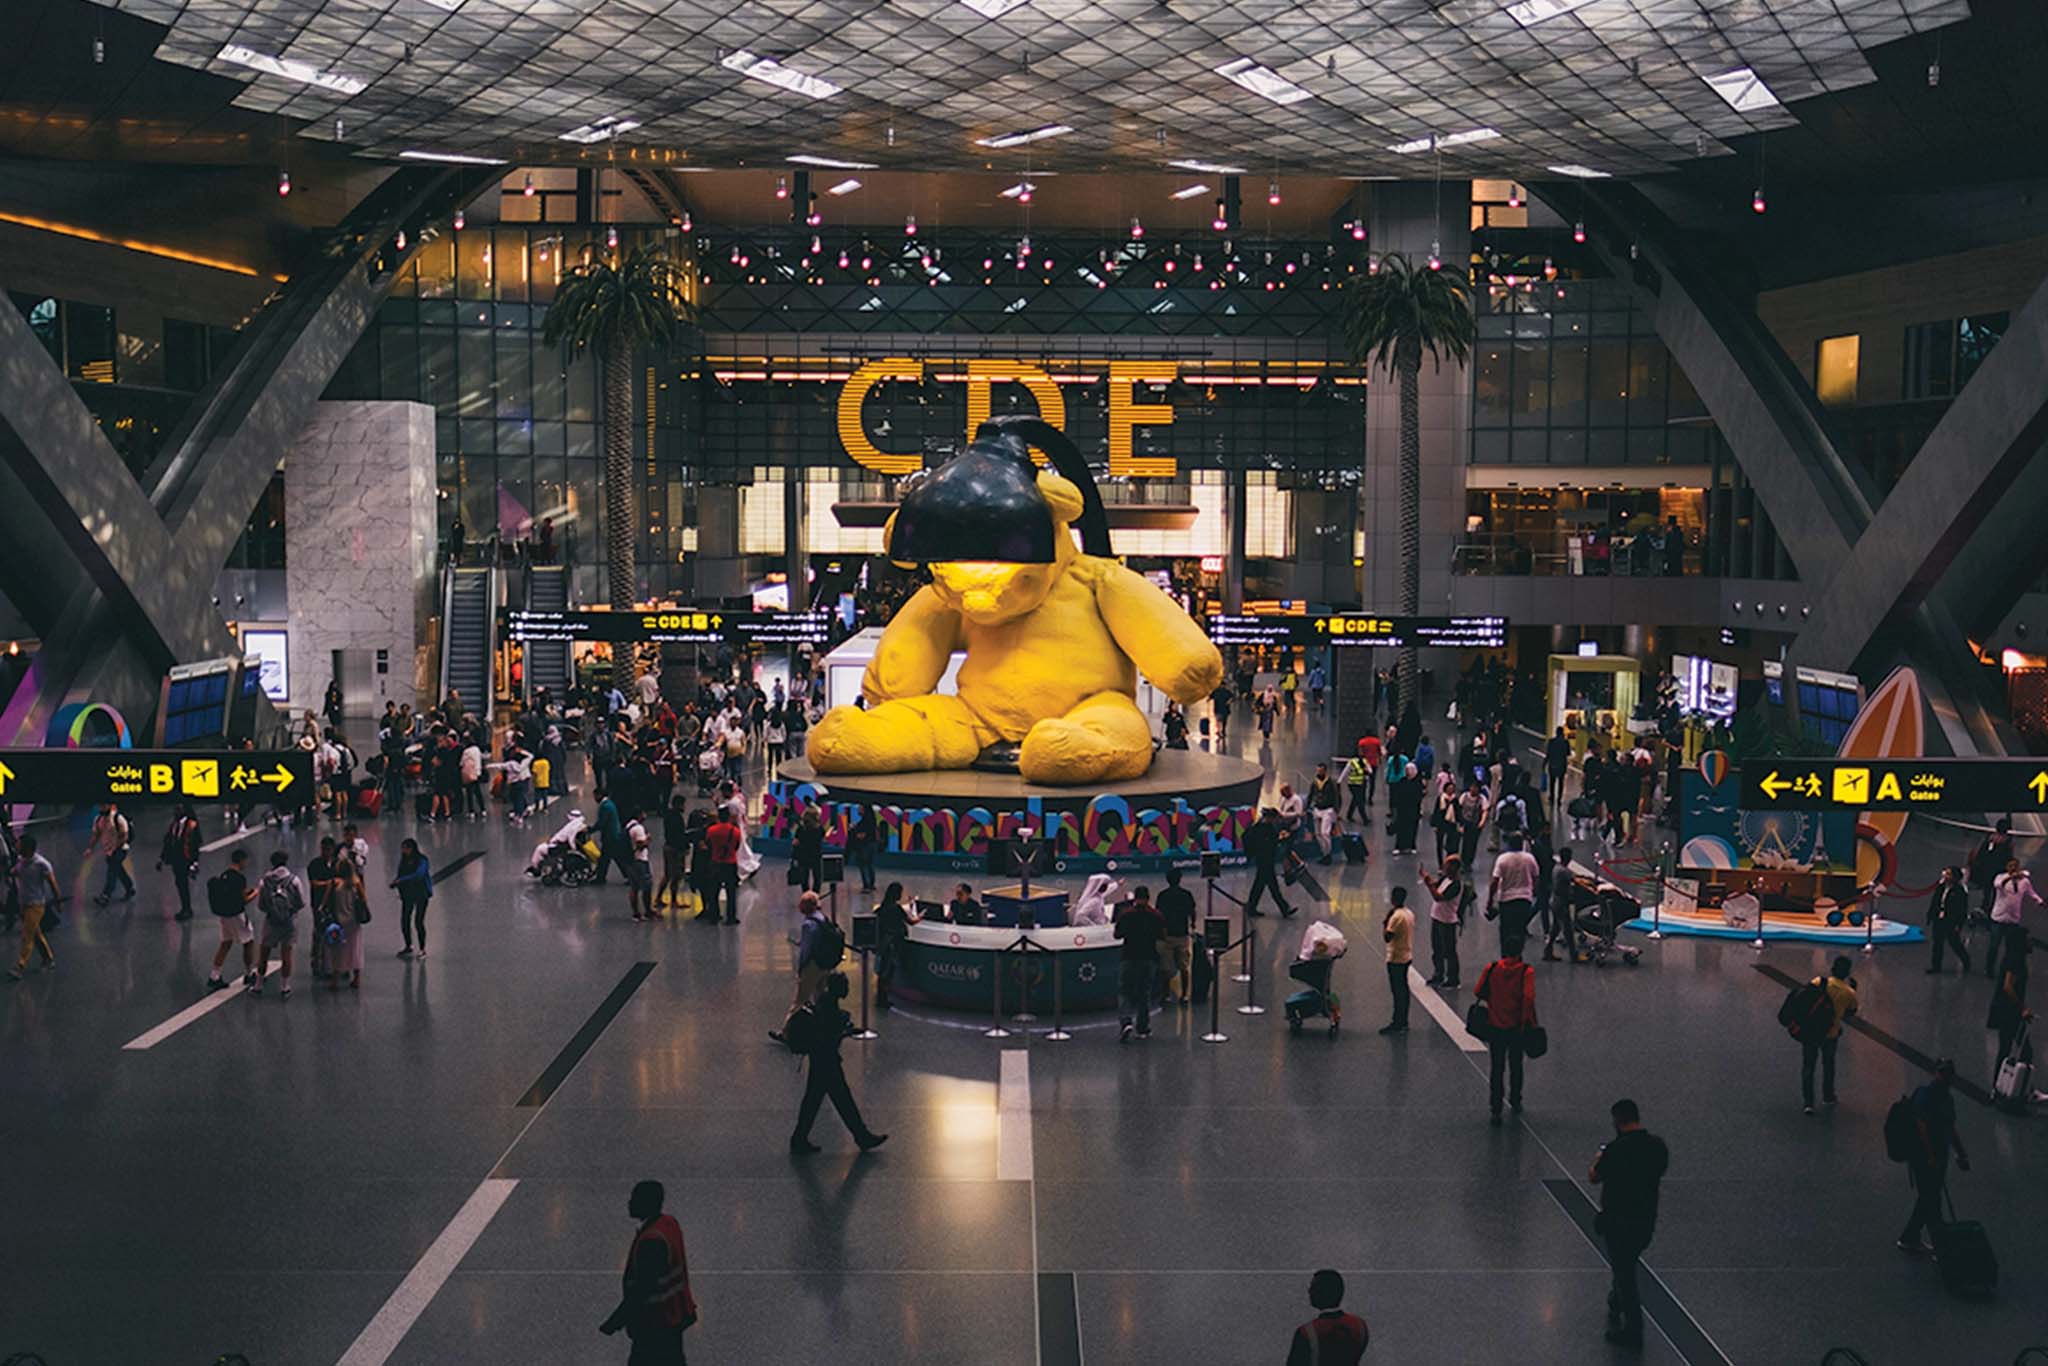 a large yellow stuffed bear in a large building